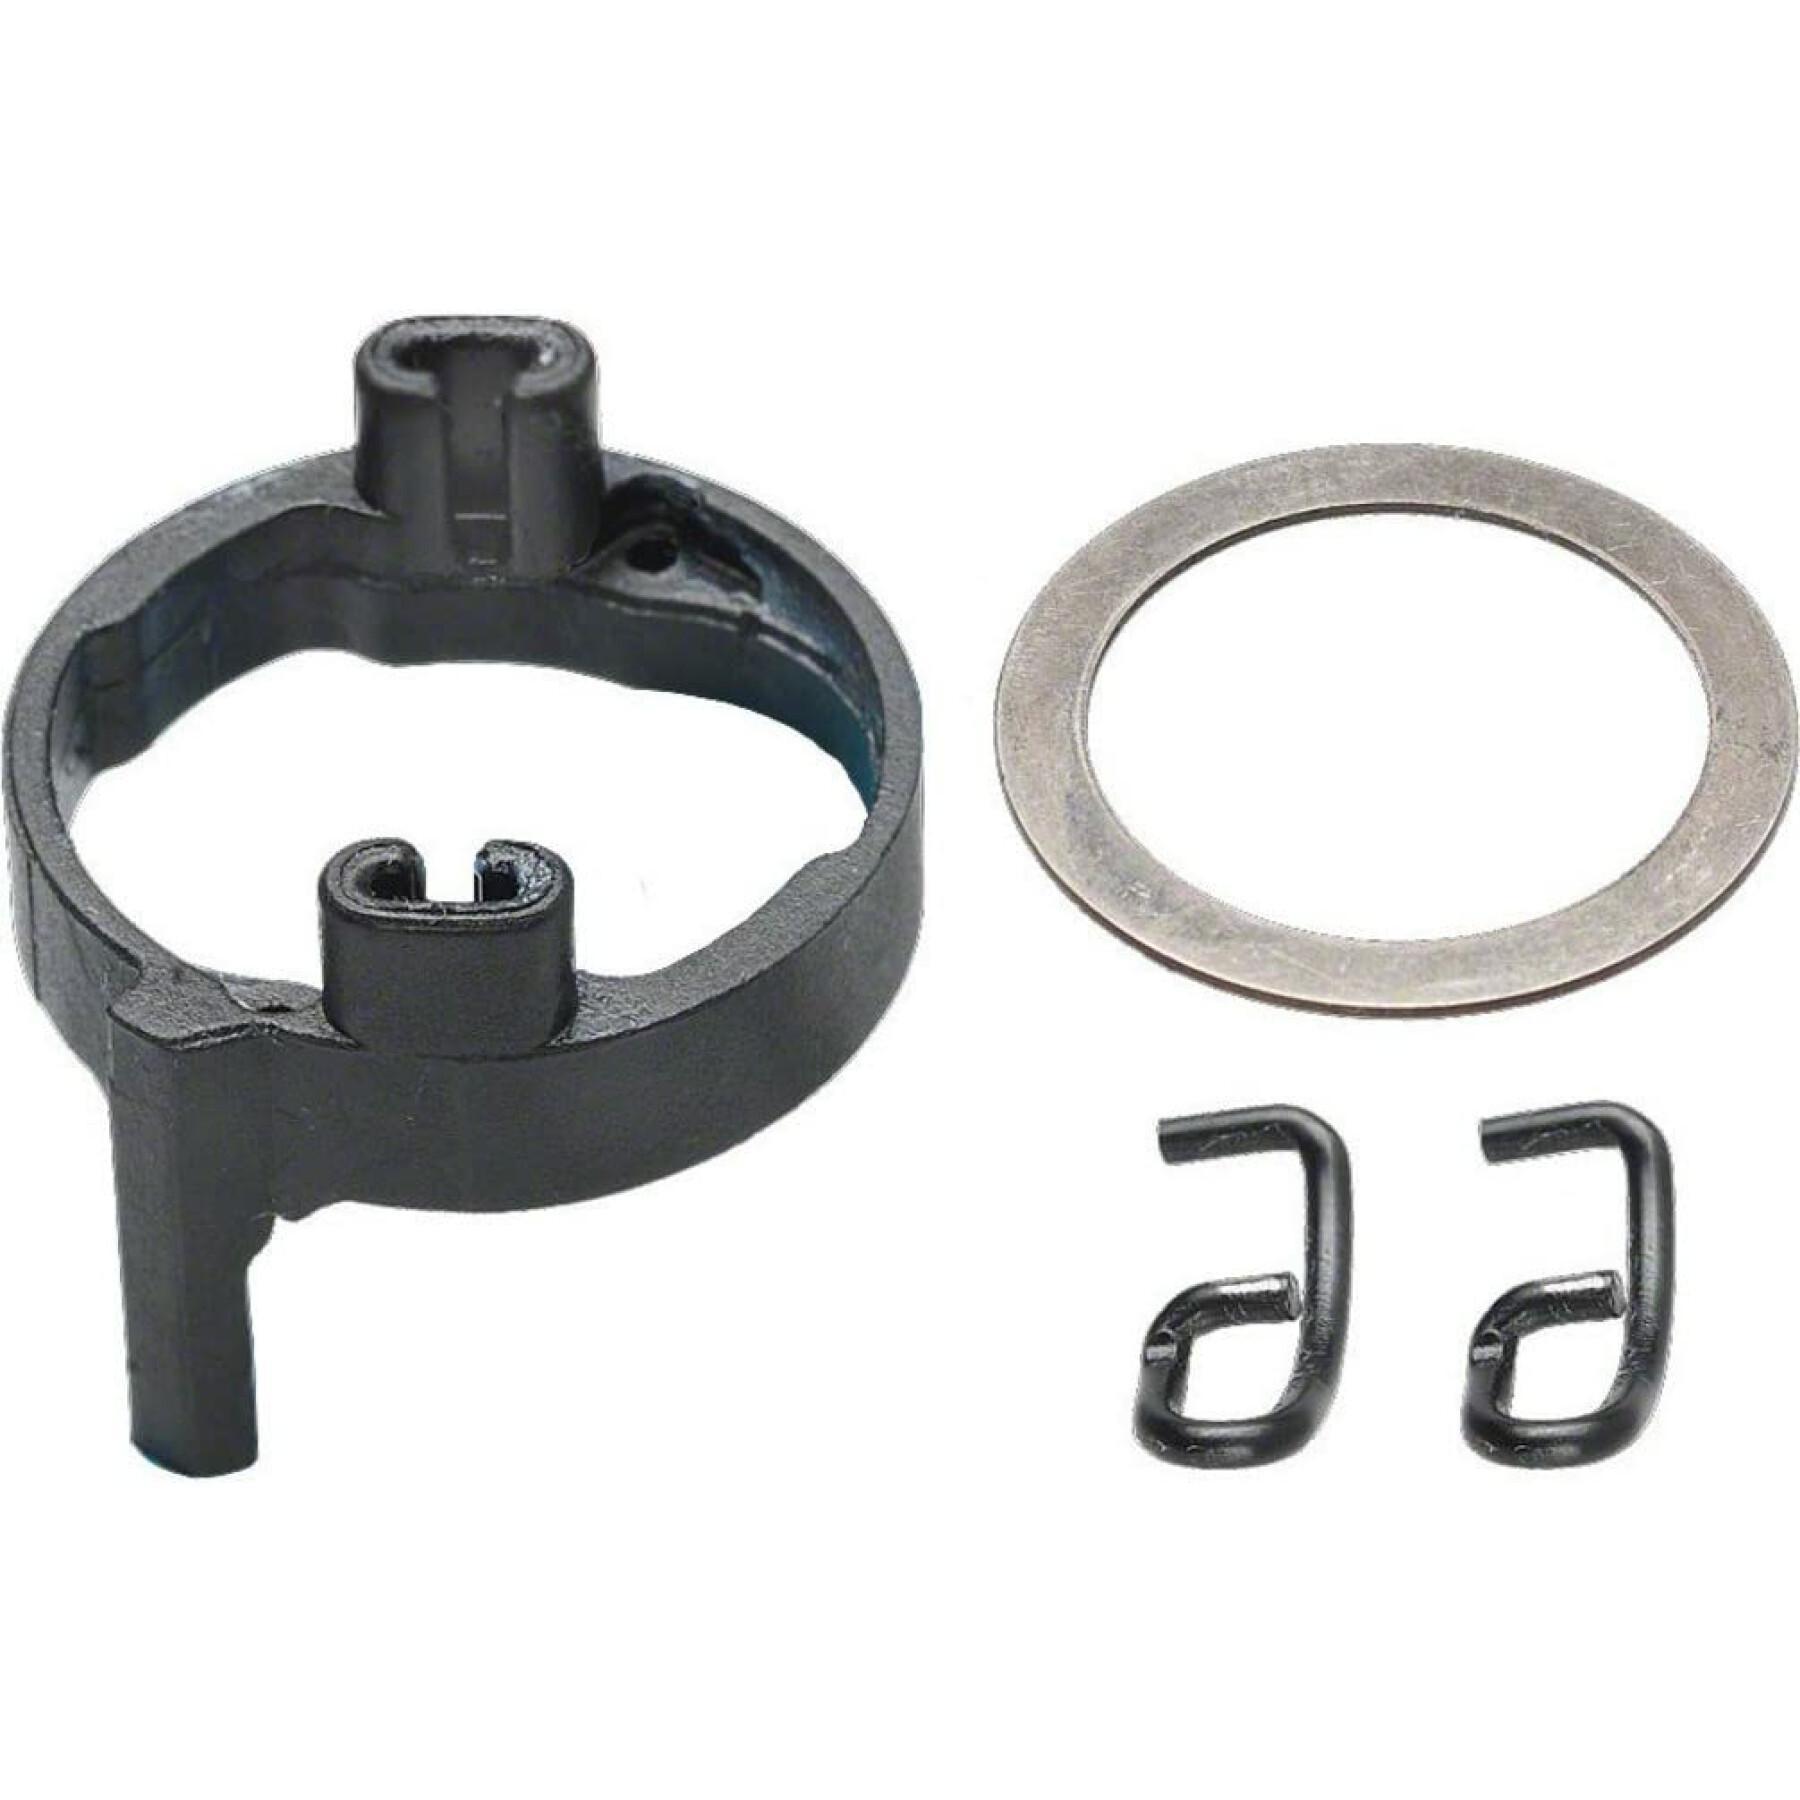 Spring washer/spring kit right hand Campagnolo ergopower (2004-2008)